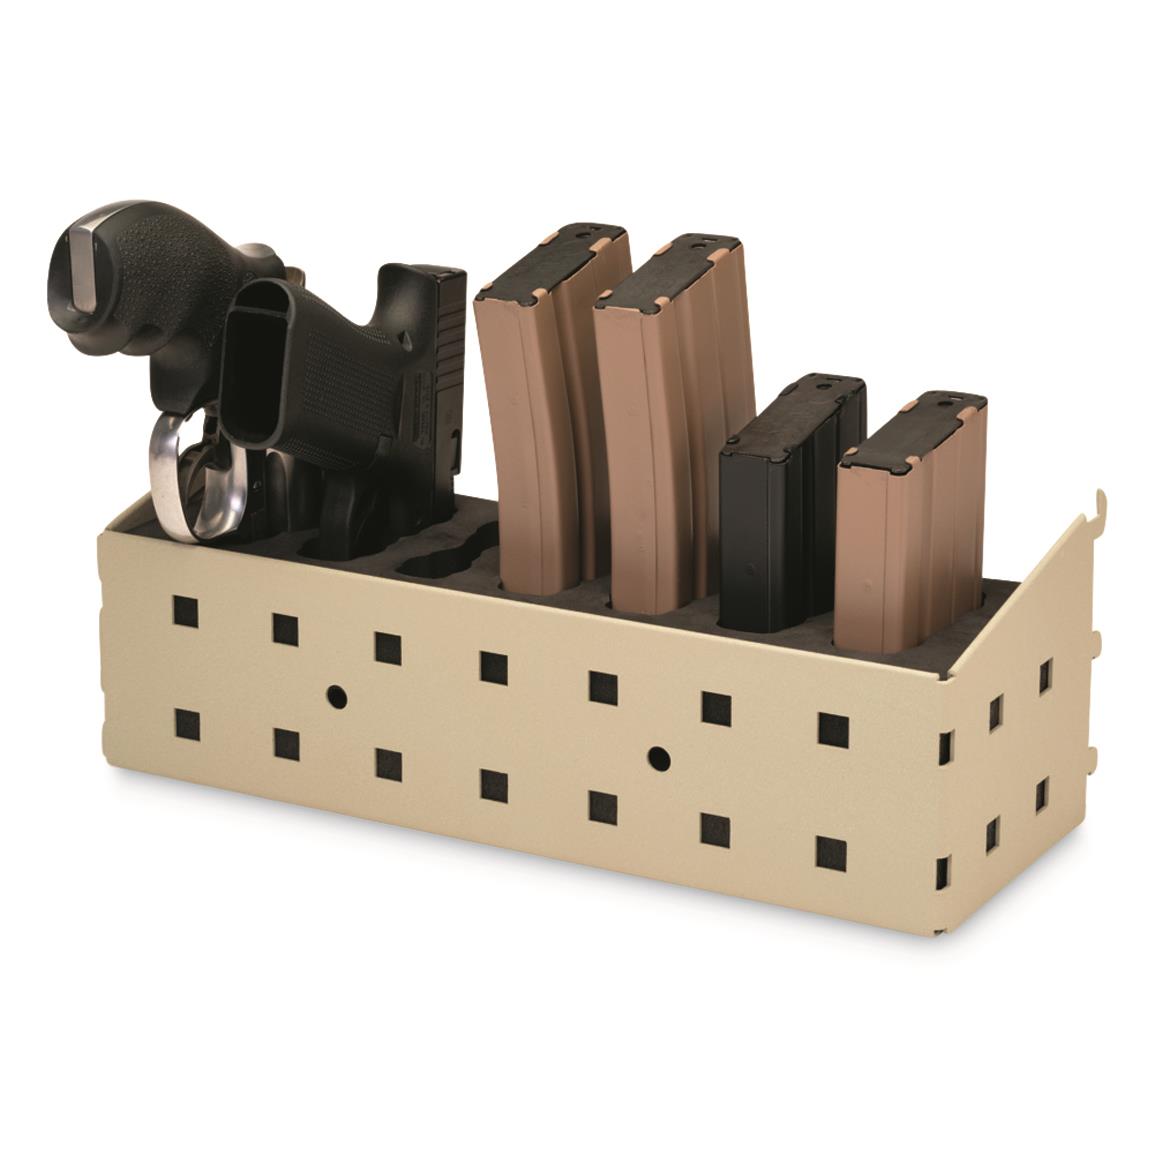 Removable foam insert cradles handgun and rifle magazines, or removes for larger items like binoculars, tools, etc.
